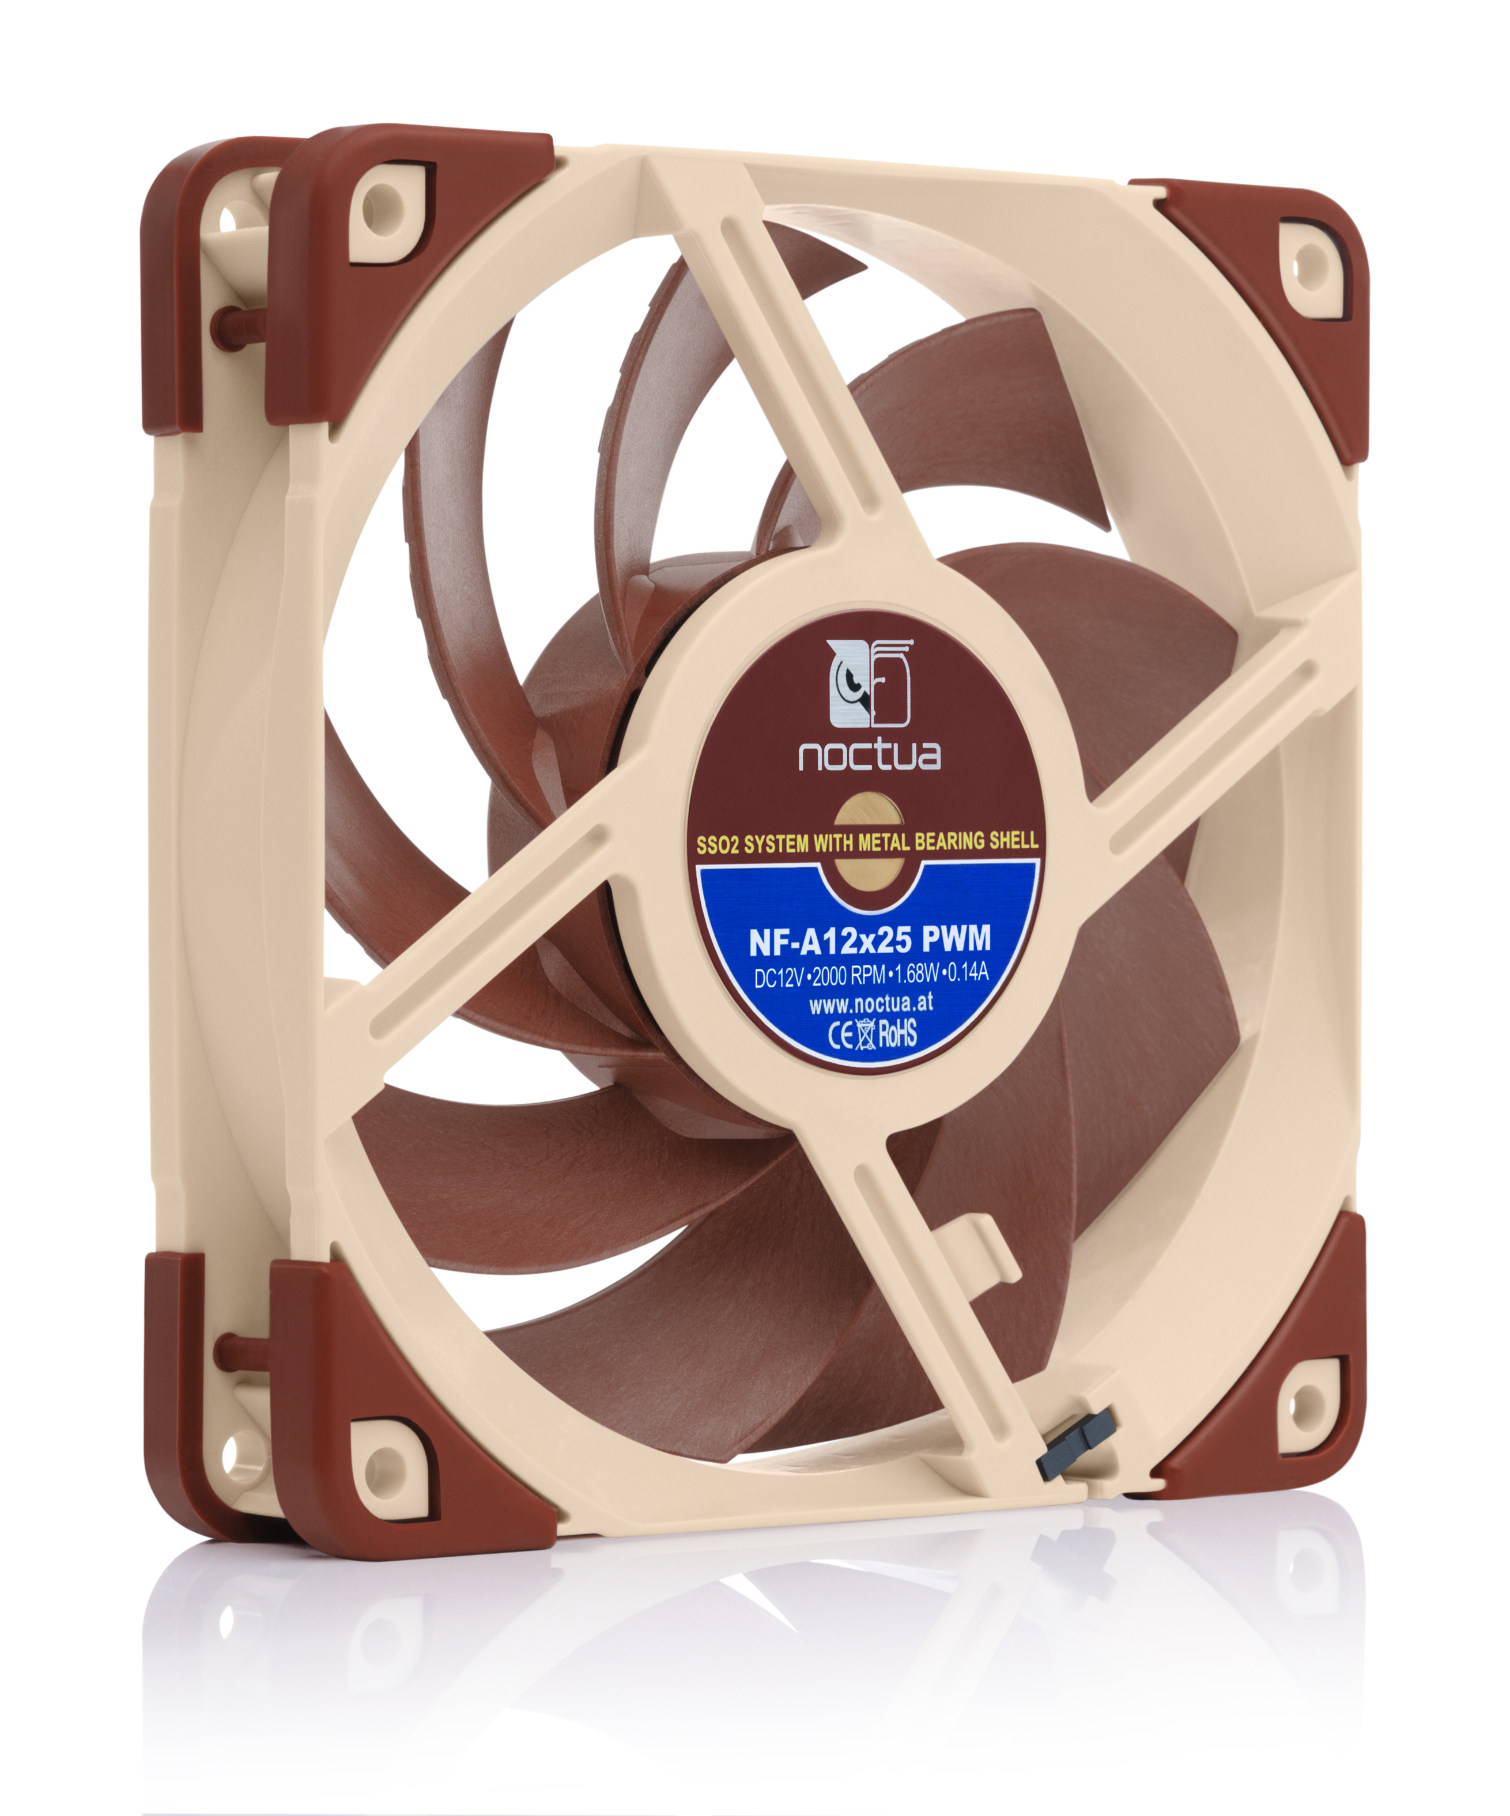 Noctua Releases All-New NF-A12x25 120mm Fan | Tom's Hardware